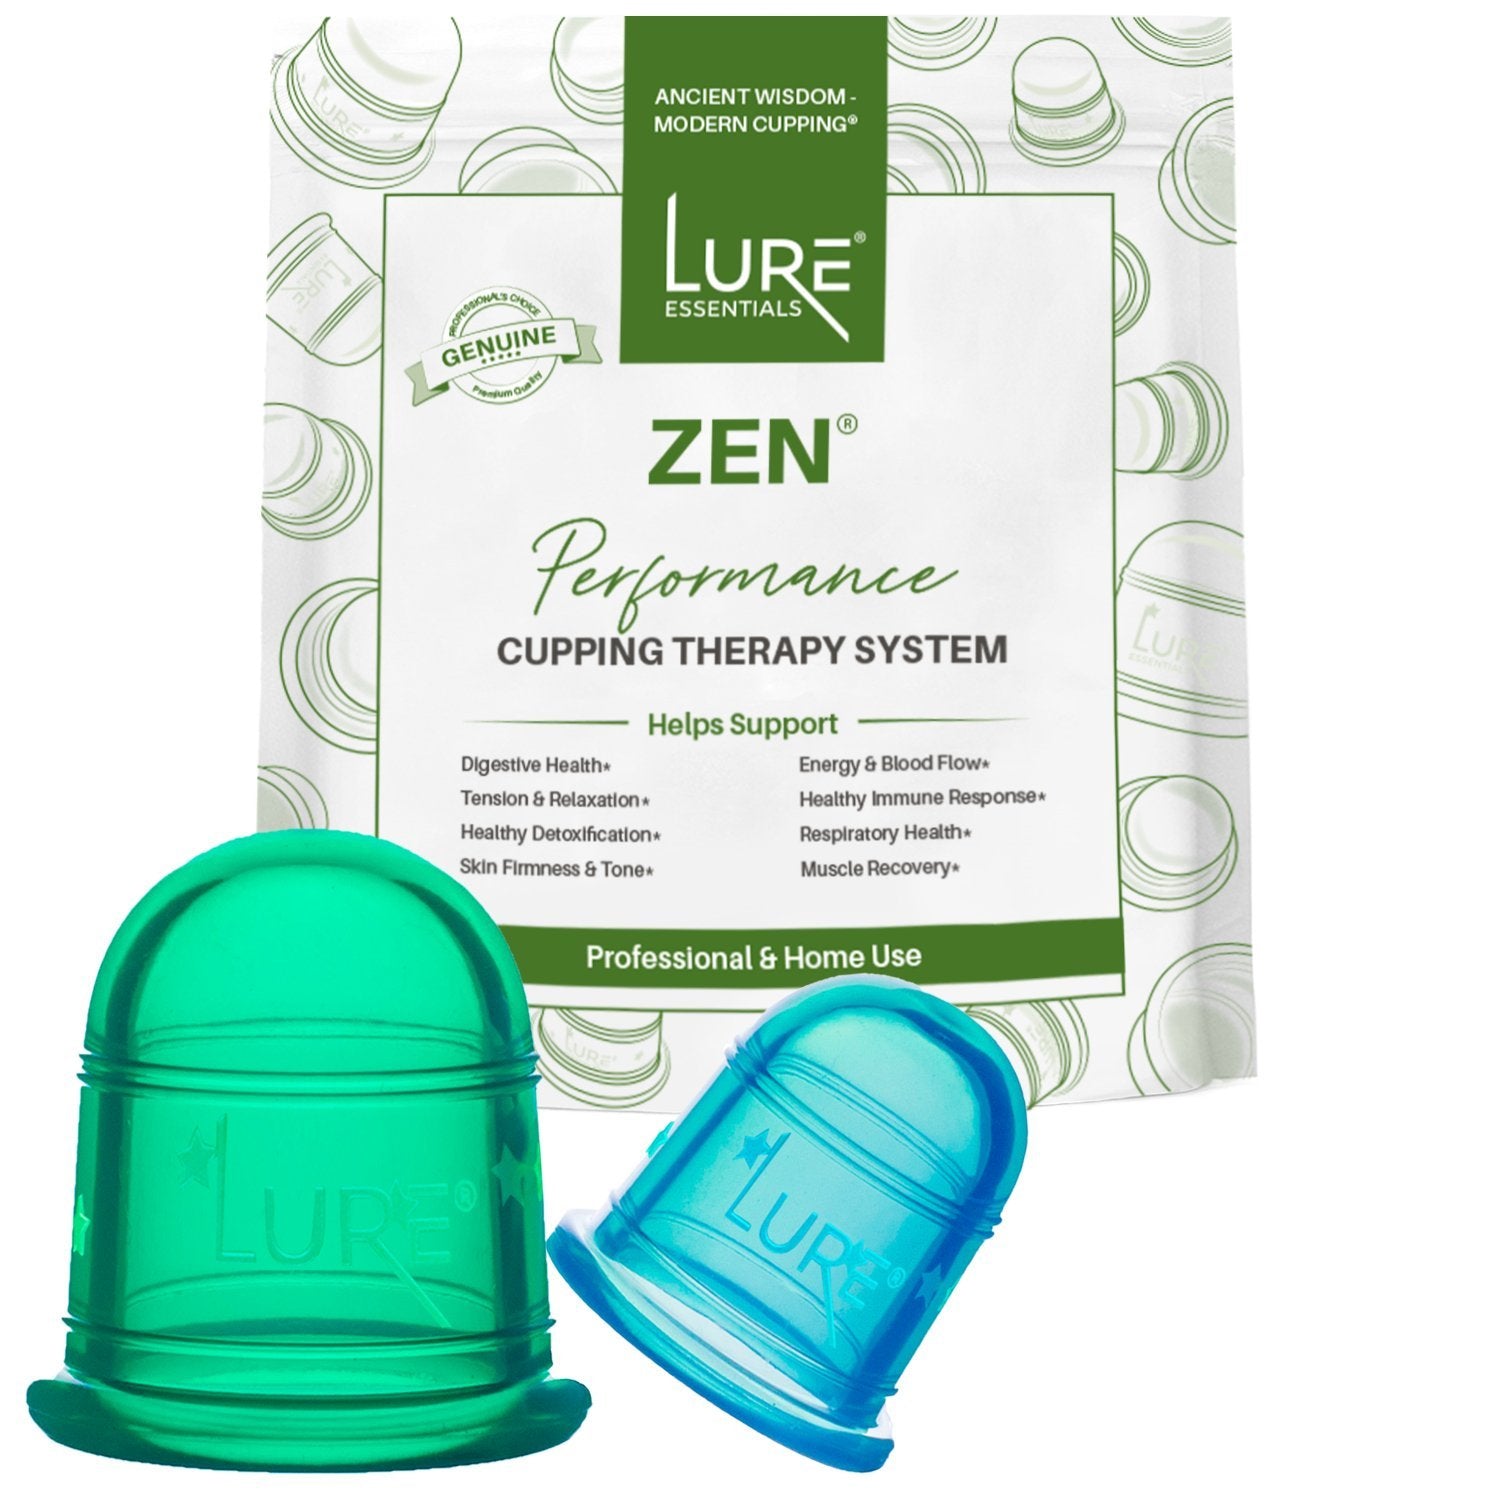 Zen Spa Anti Cellulite Cupping Kit 1 Small a Large